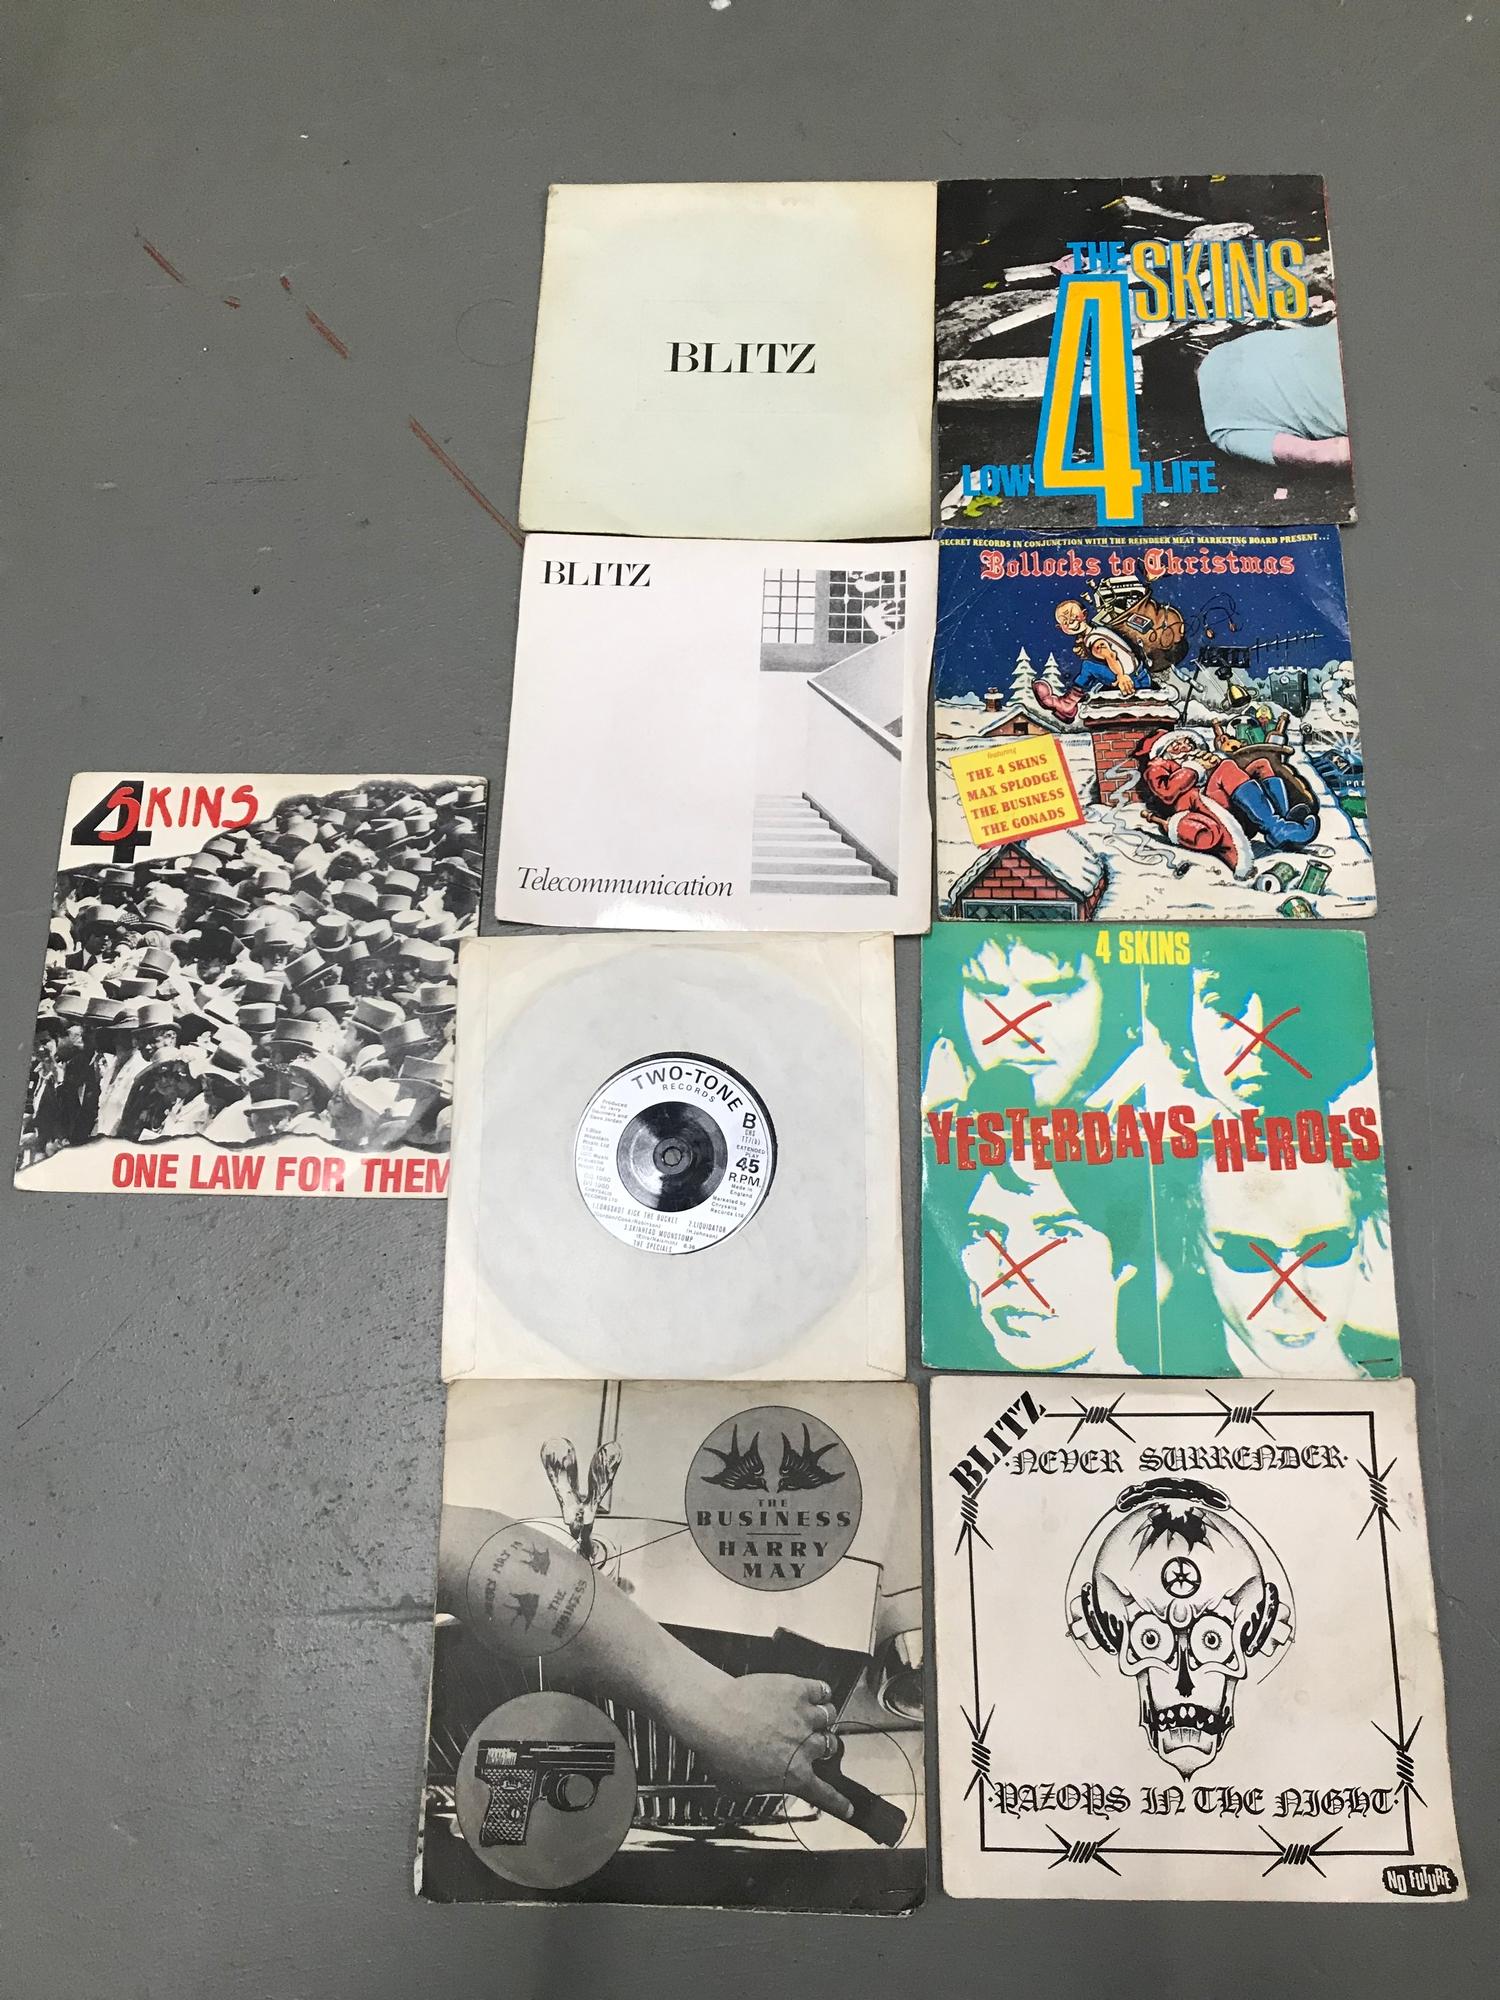 A Lot of 9 Oi & Skinhead 45rmp's includes 4 Skins, The Business Harry May & Bollocks to Christmas